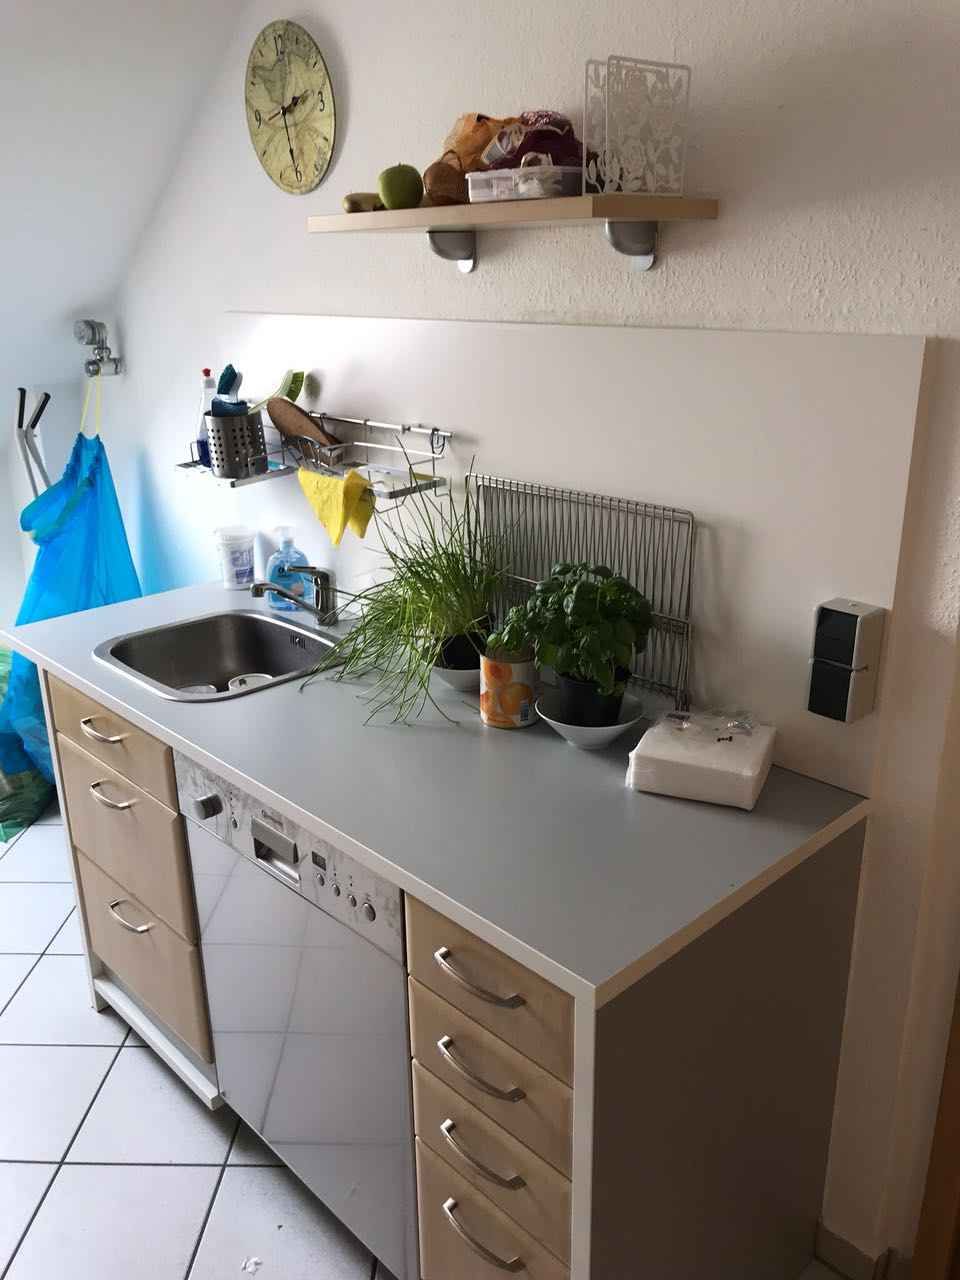 SHARED FLAT: Awesome, great apartment in Frankfurt am Main